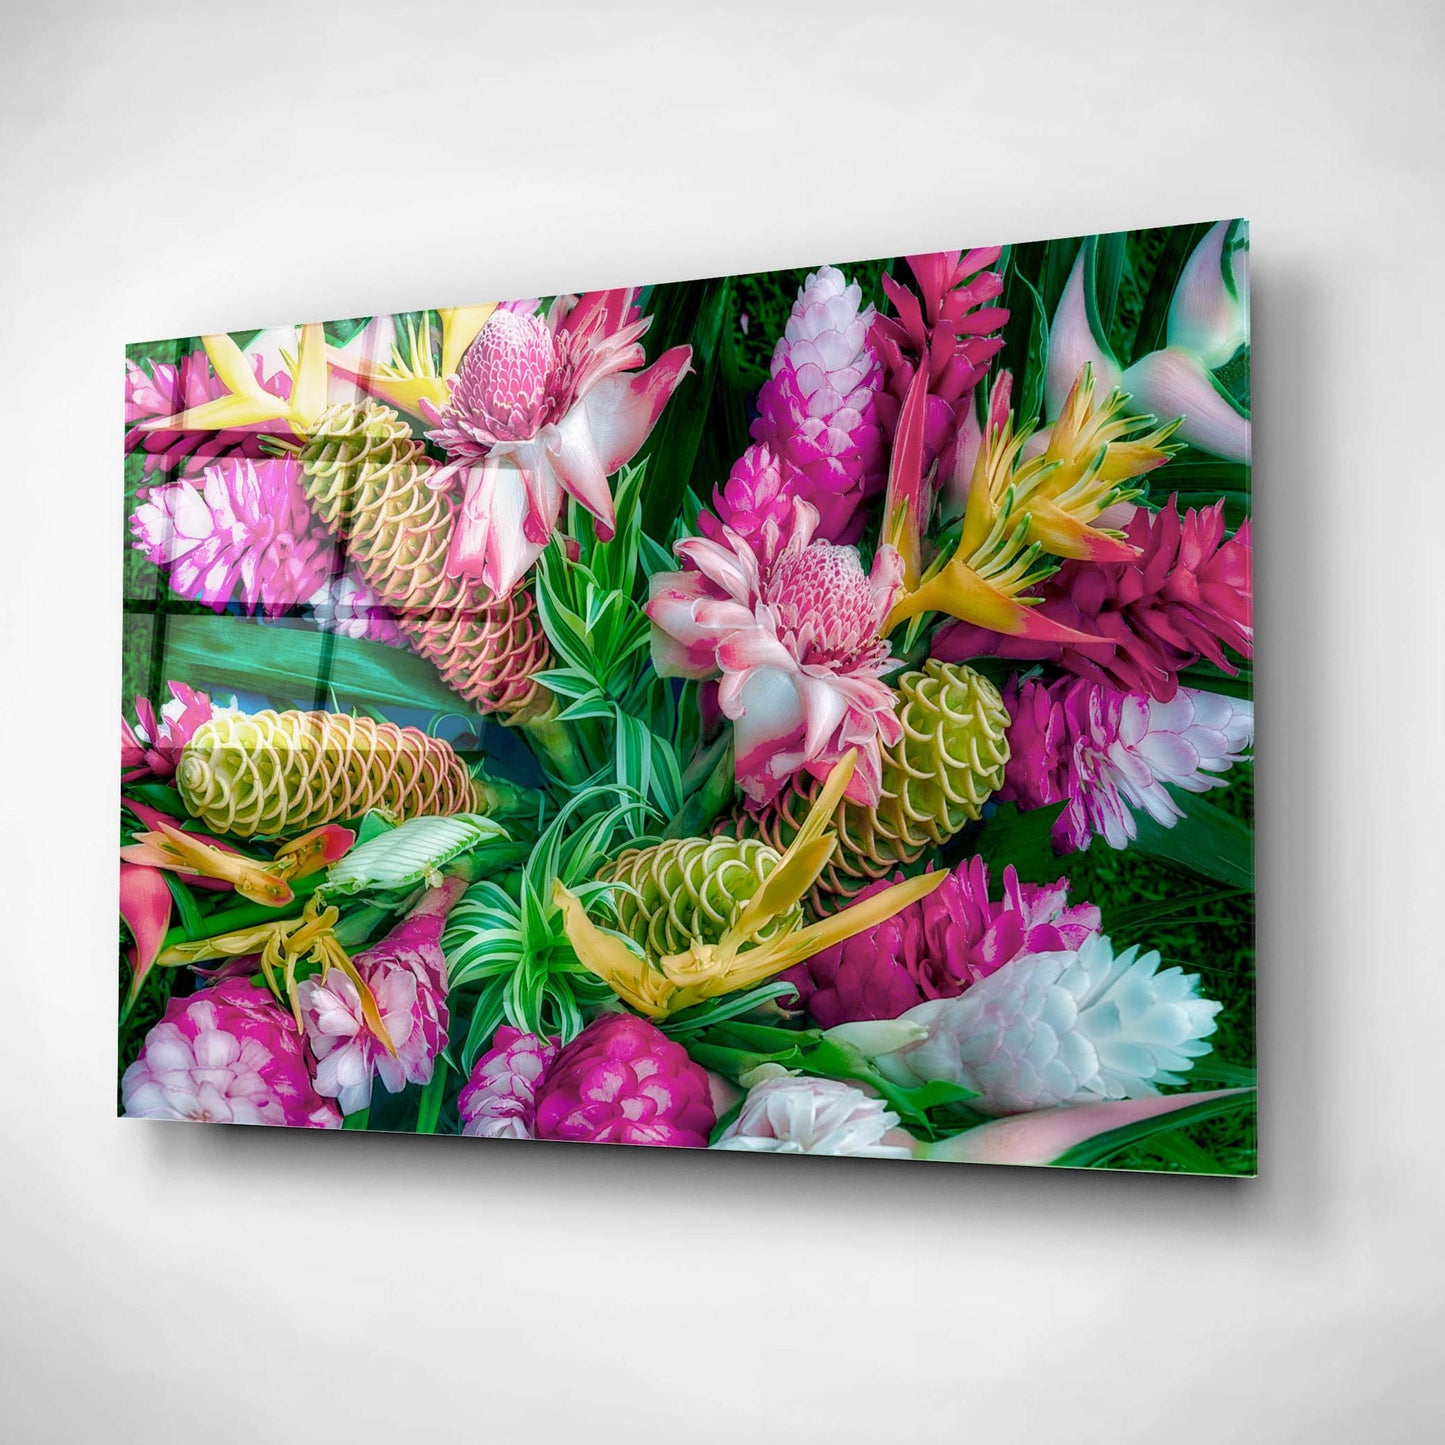 Epic Art 'Tropical Floral' by Dennis Frates, Acrylic Glass Wall Art,24x16